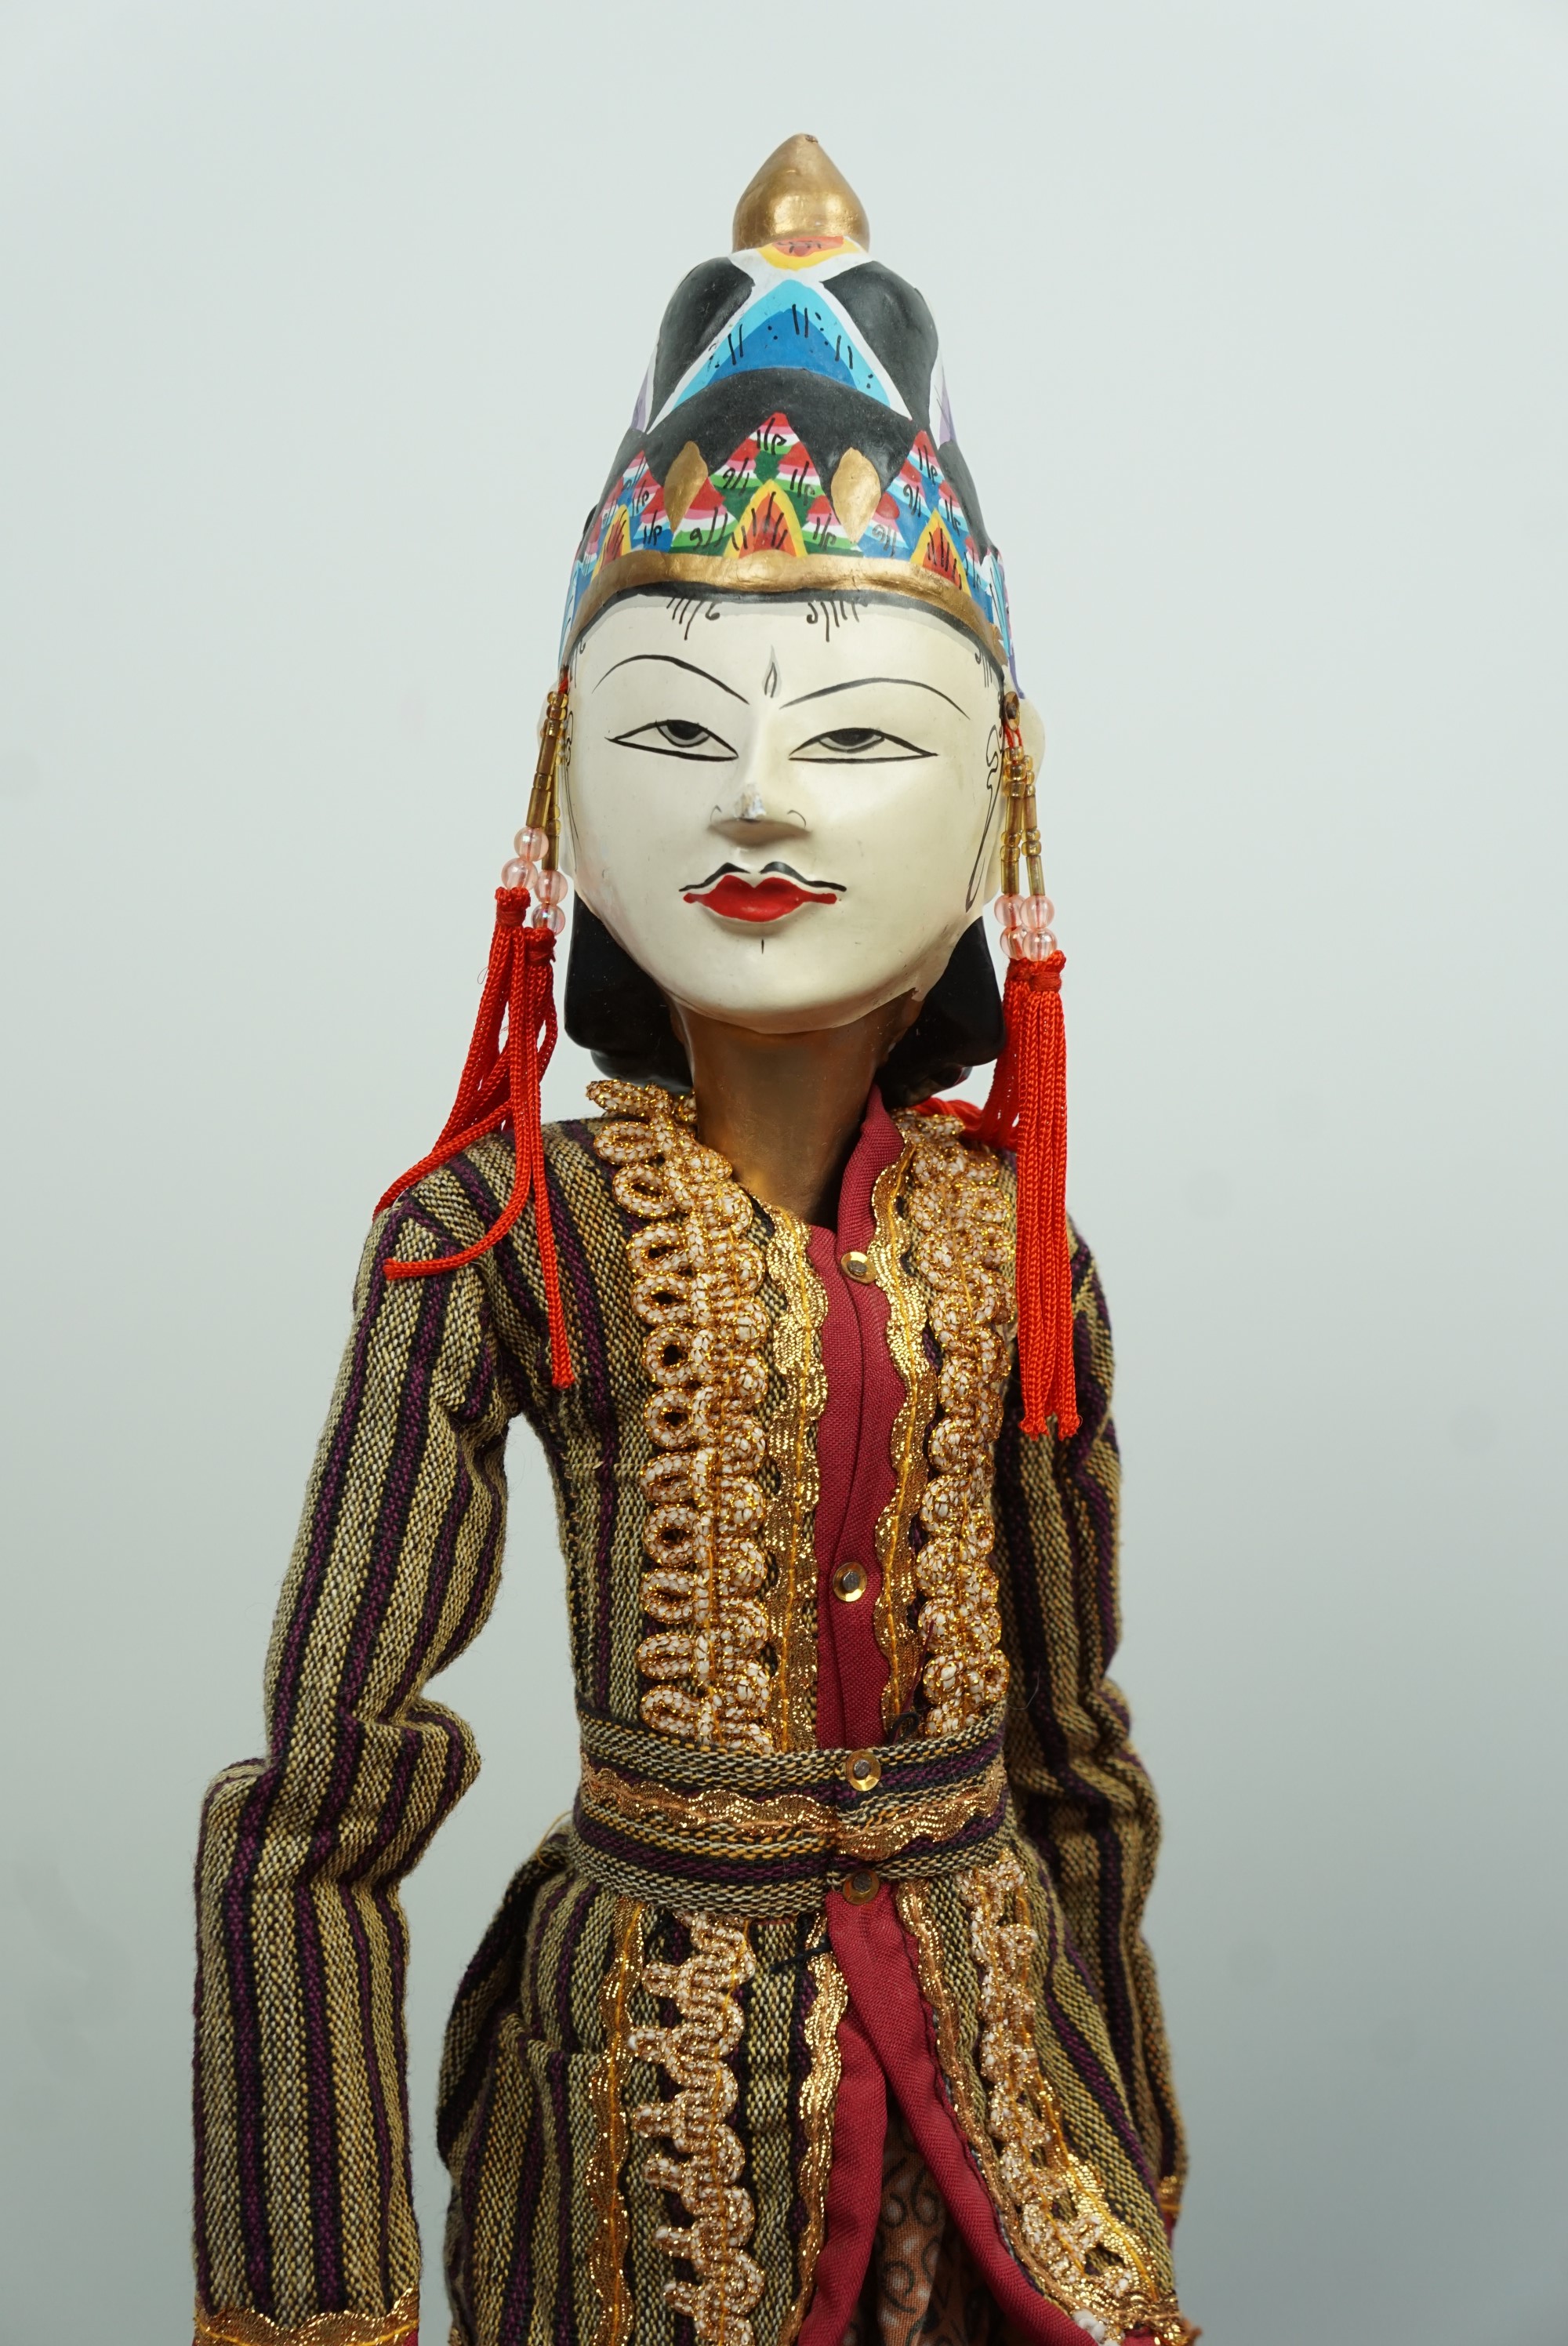 Three South Asian wooden dancing puppets, tallest 48 cm - Image 2 of 4